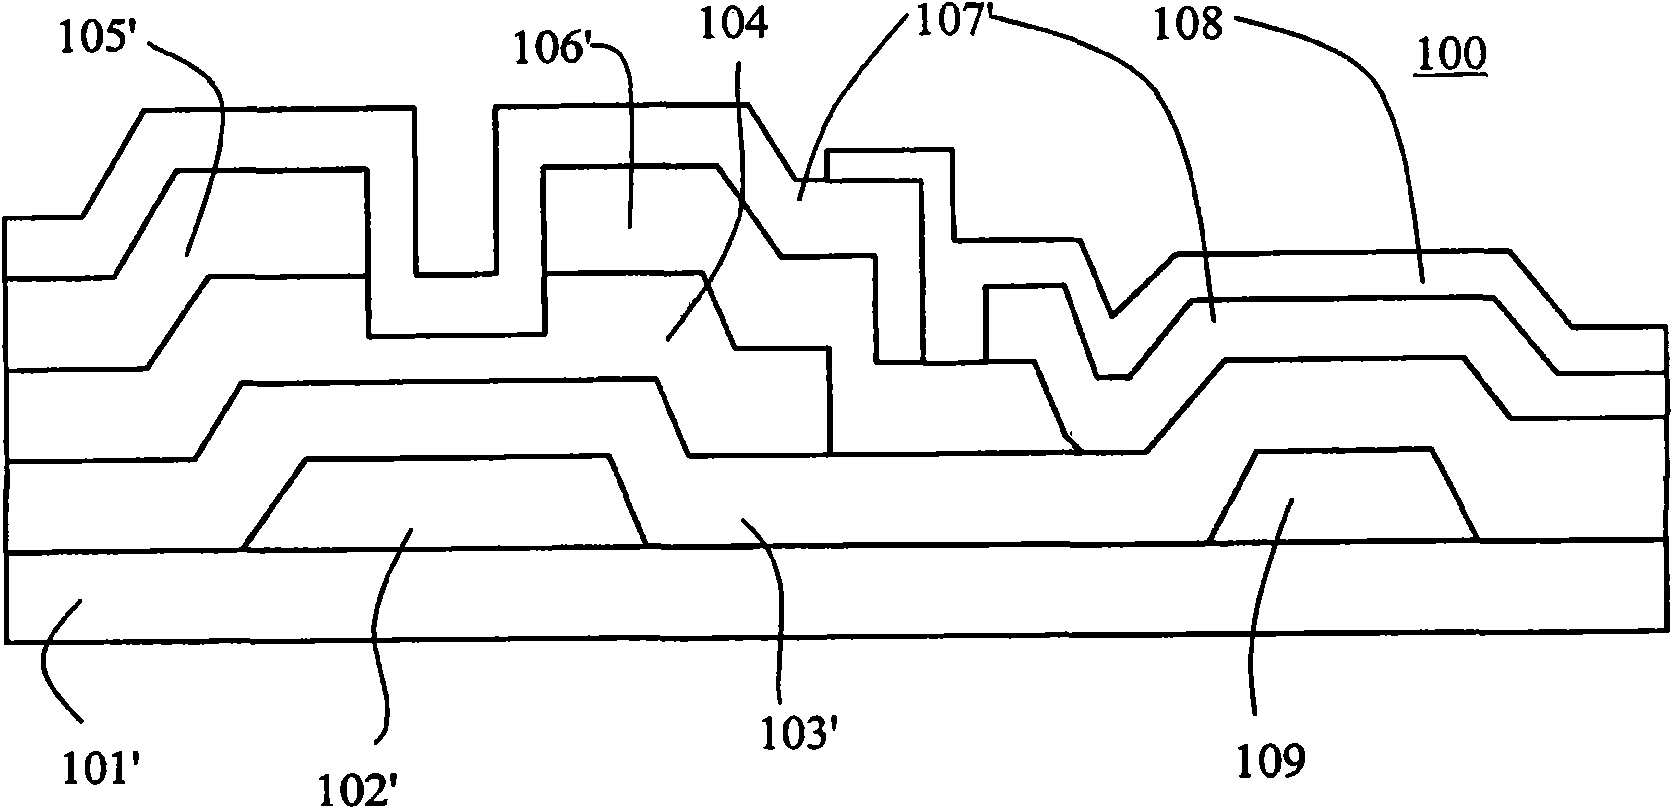 Thin-film-transistor array substrate and forming method thereof